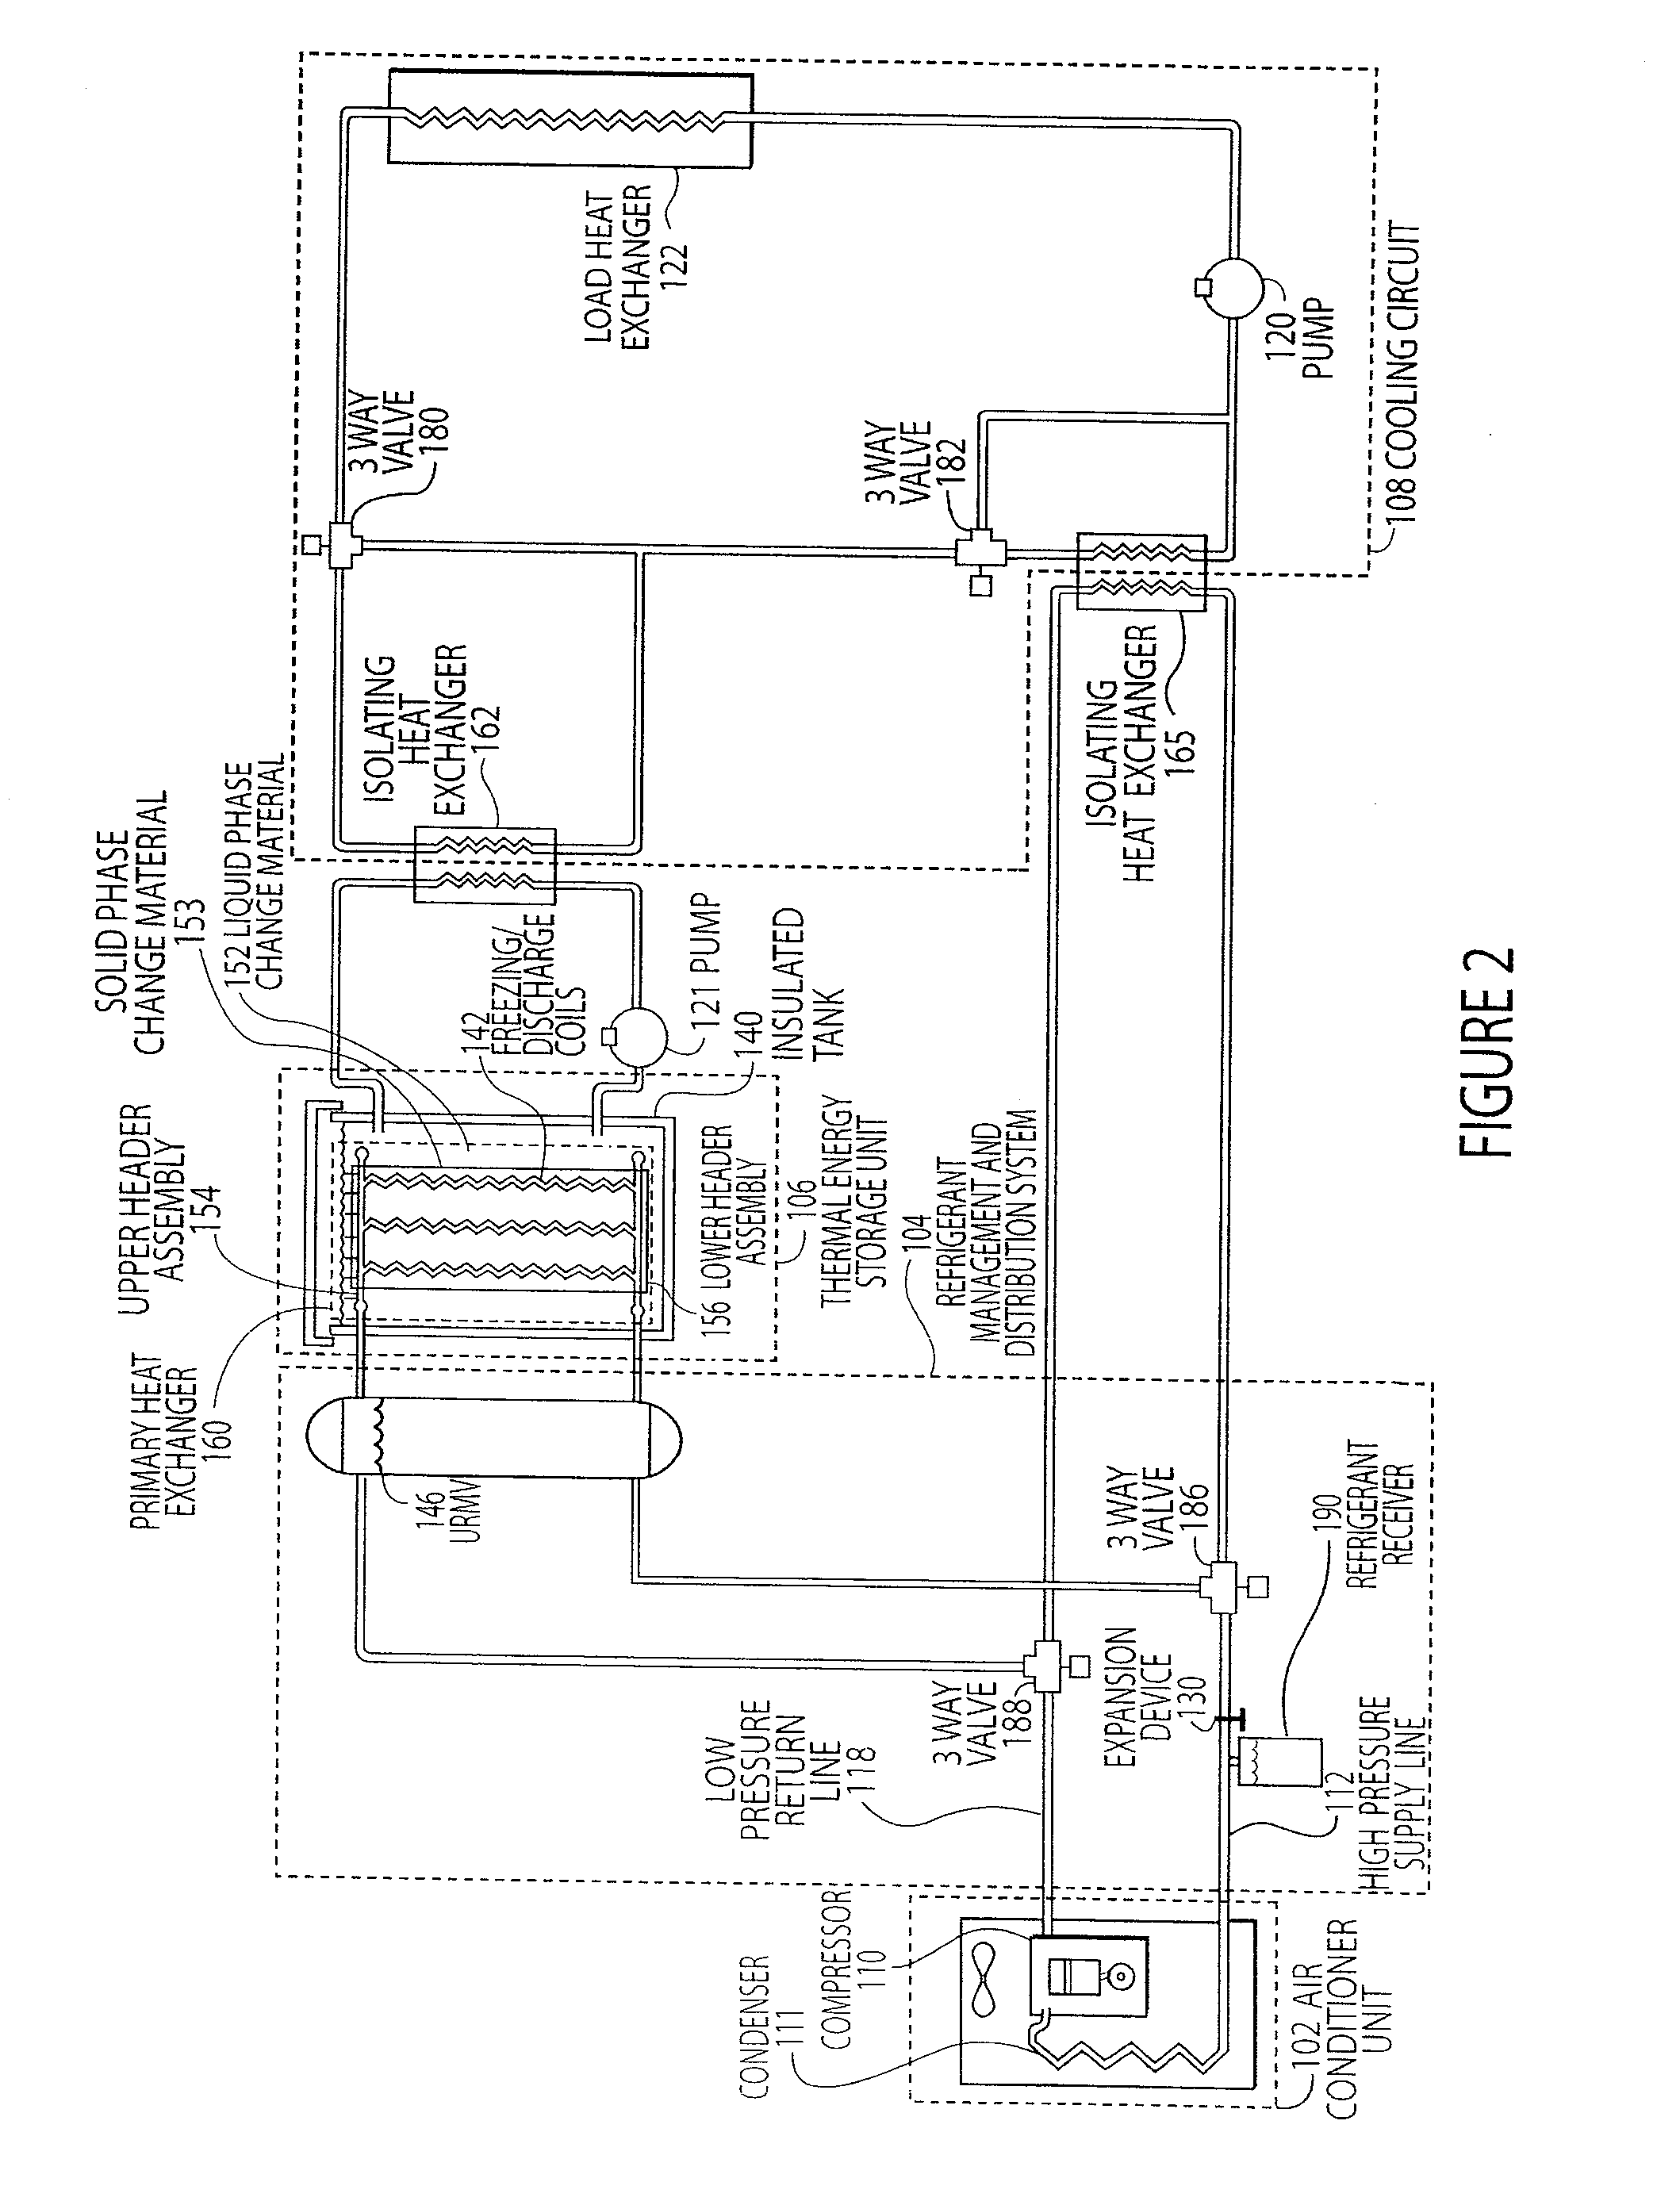 Thermal energy storage and cooling system with isolated evaporator coil